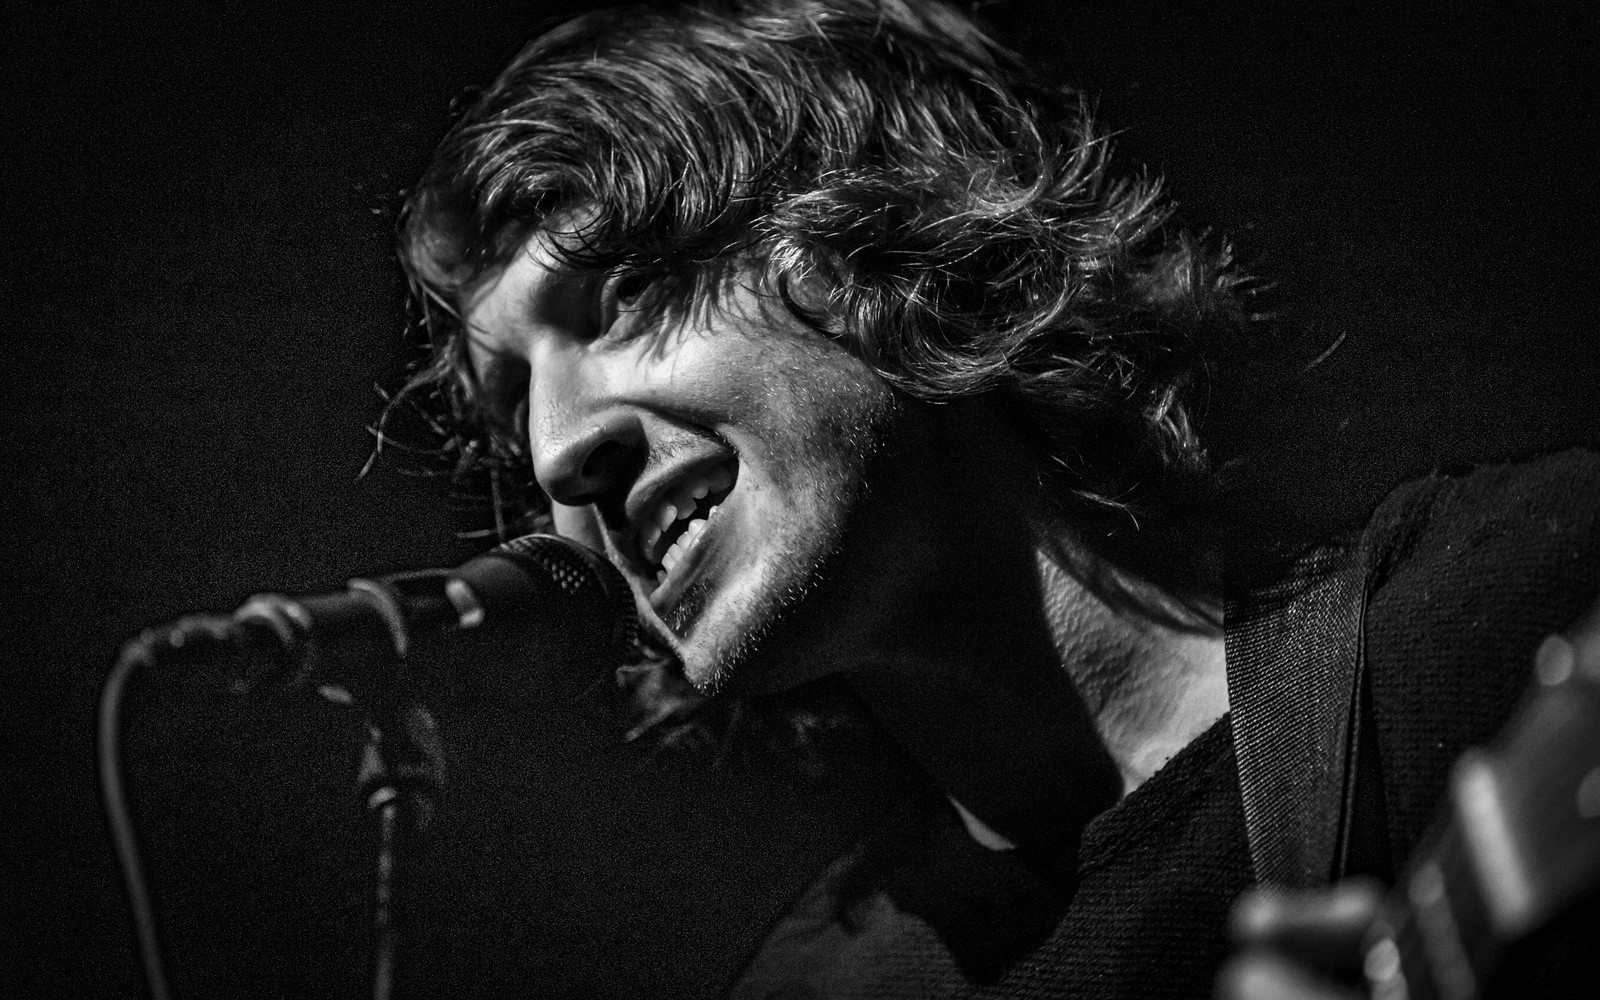 Dean Lewis (7 Layers)